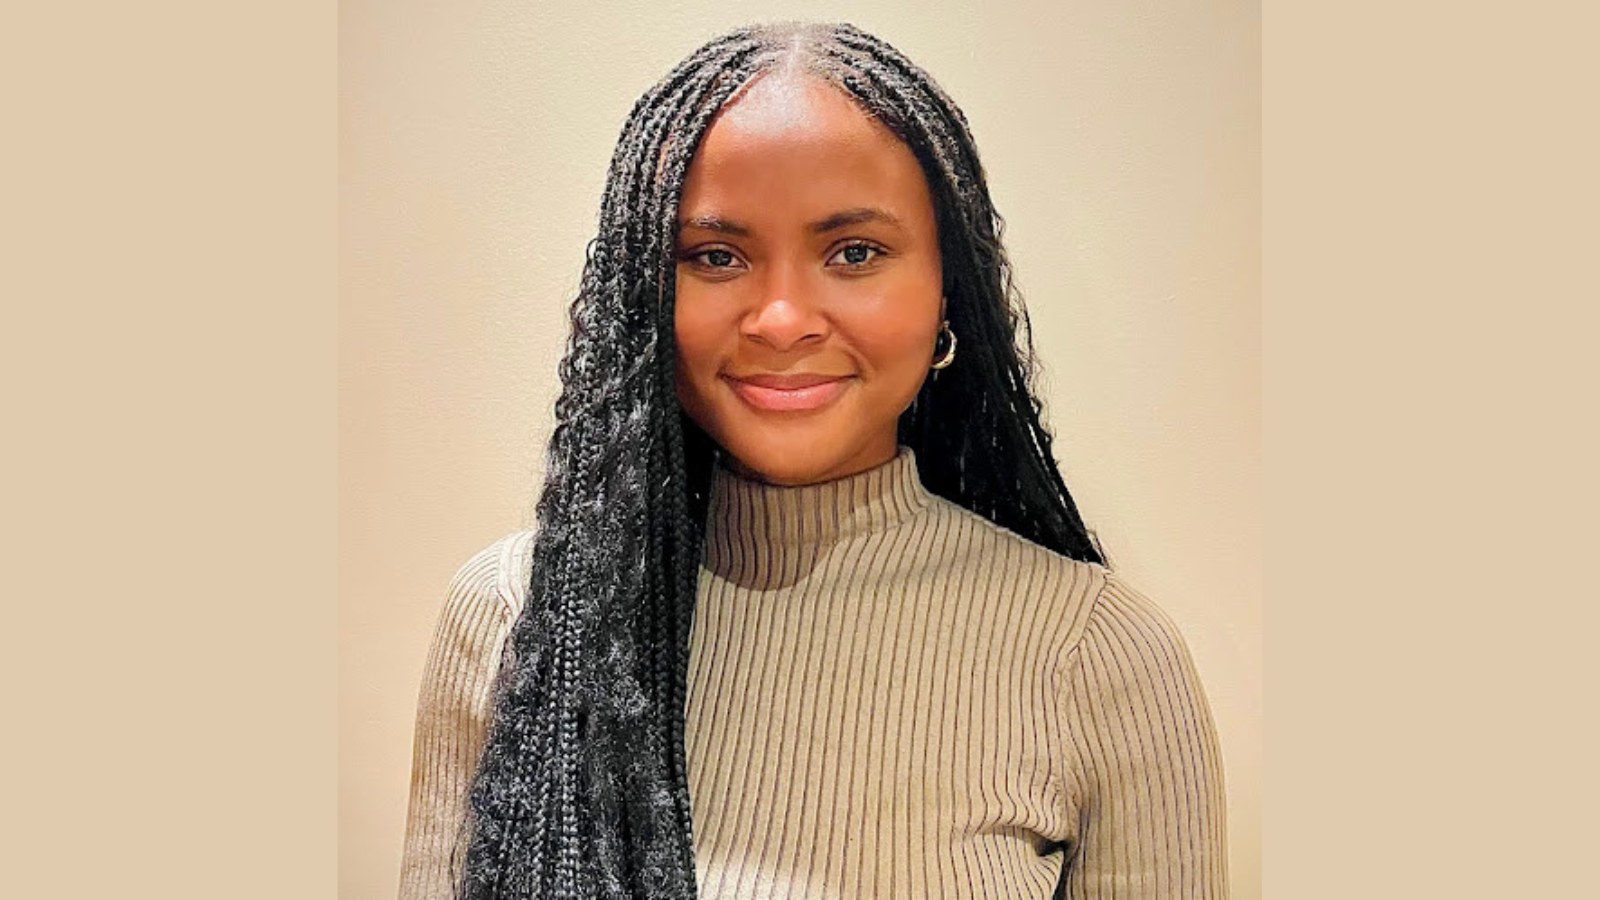 2023 Spring Every Learner Everywhere intern Chidinmma Egemonu understands first-hand the difficulties students face navigating equity and education technology in higher education.